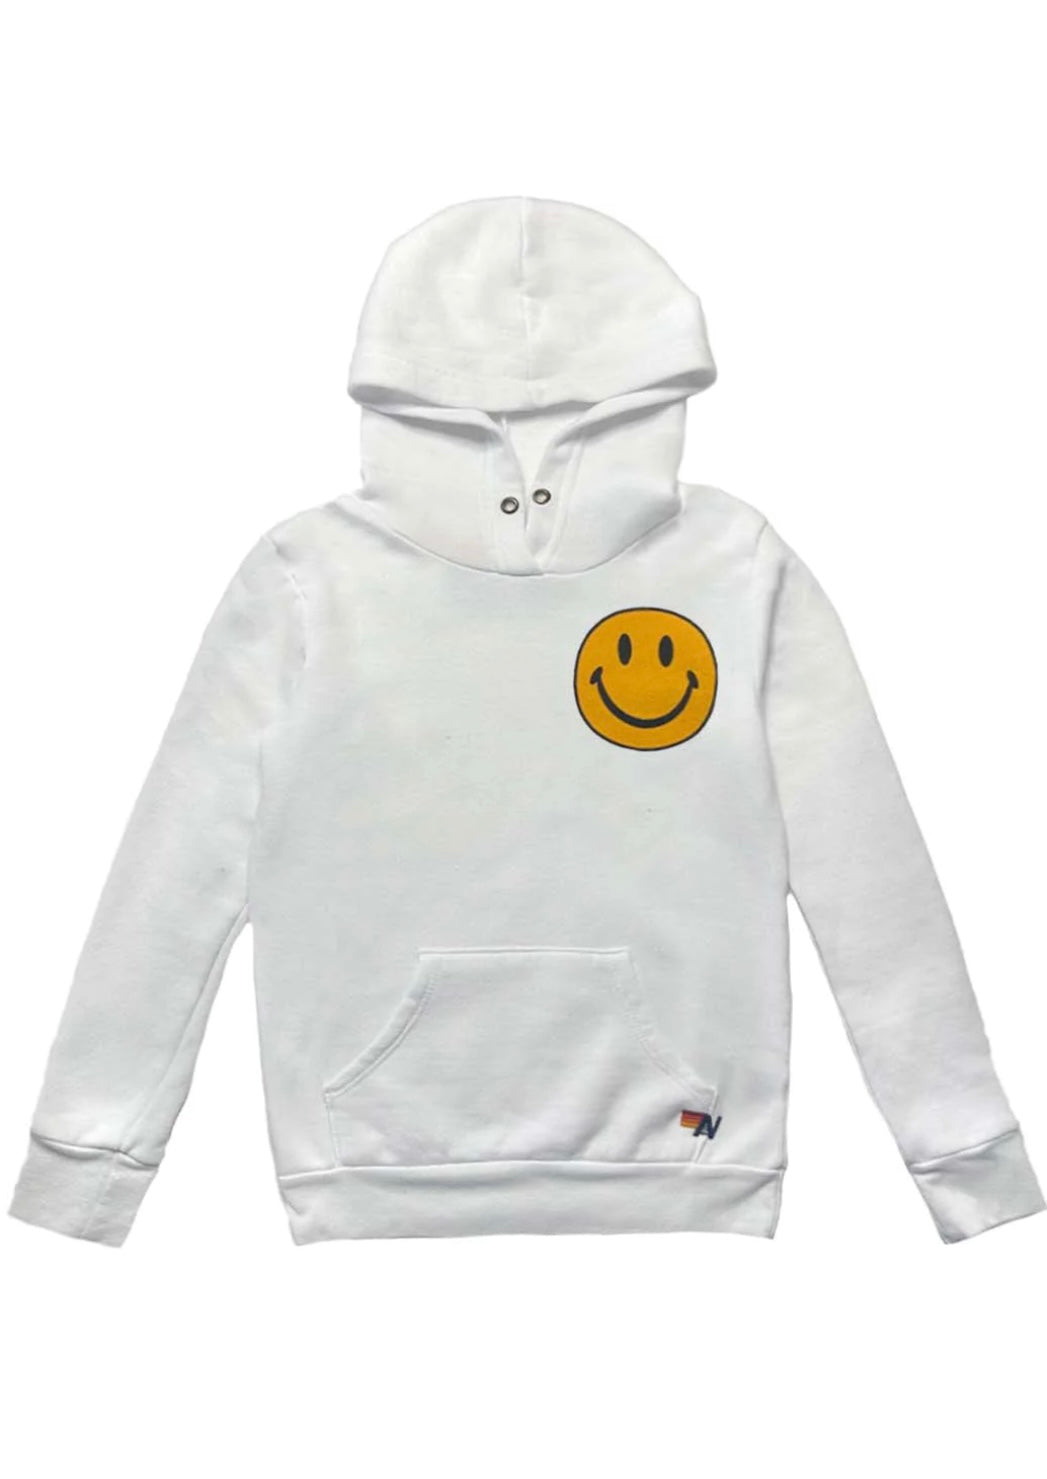 Aviator Nation Kid’s Smiley 2 Pullover Hoodie - White